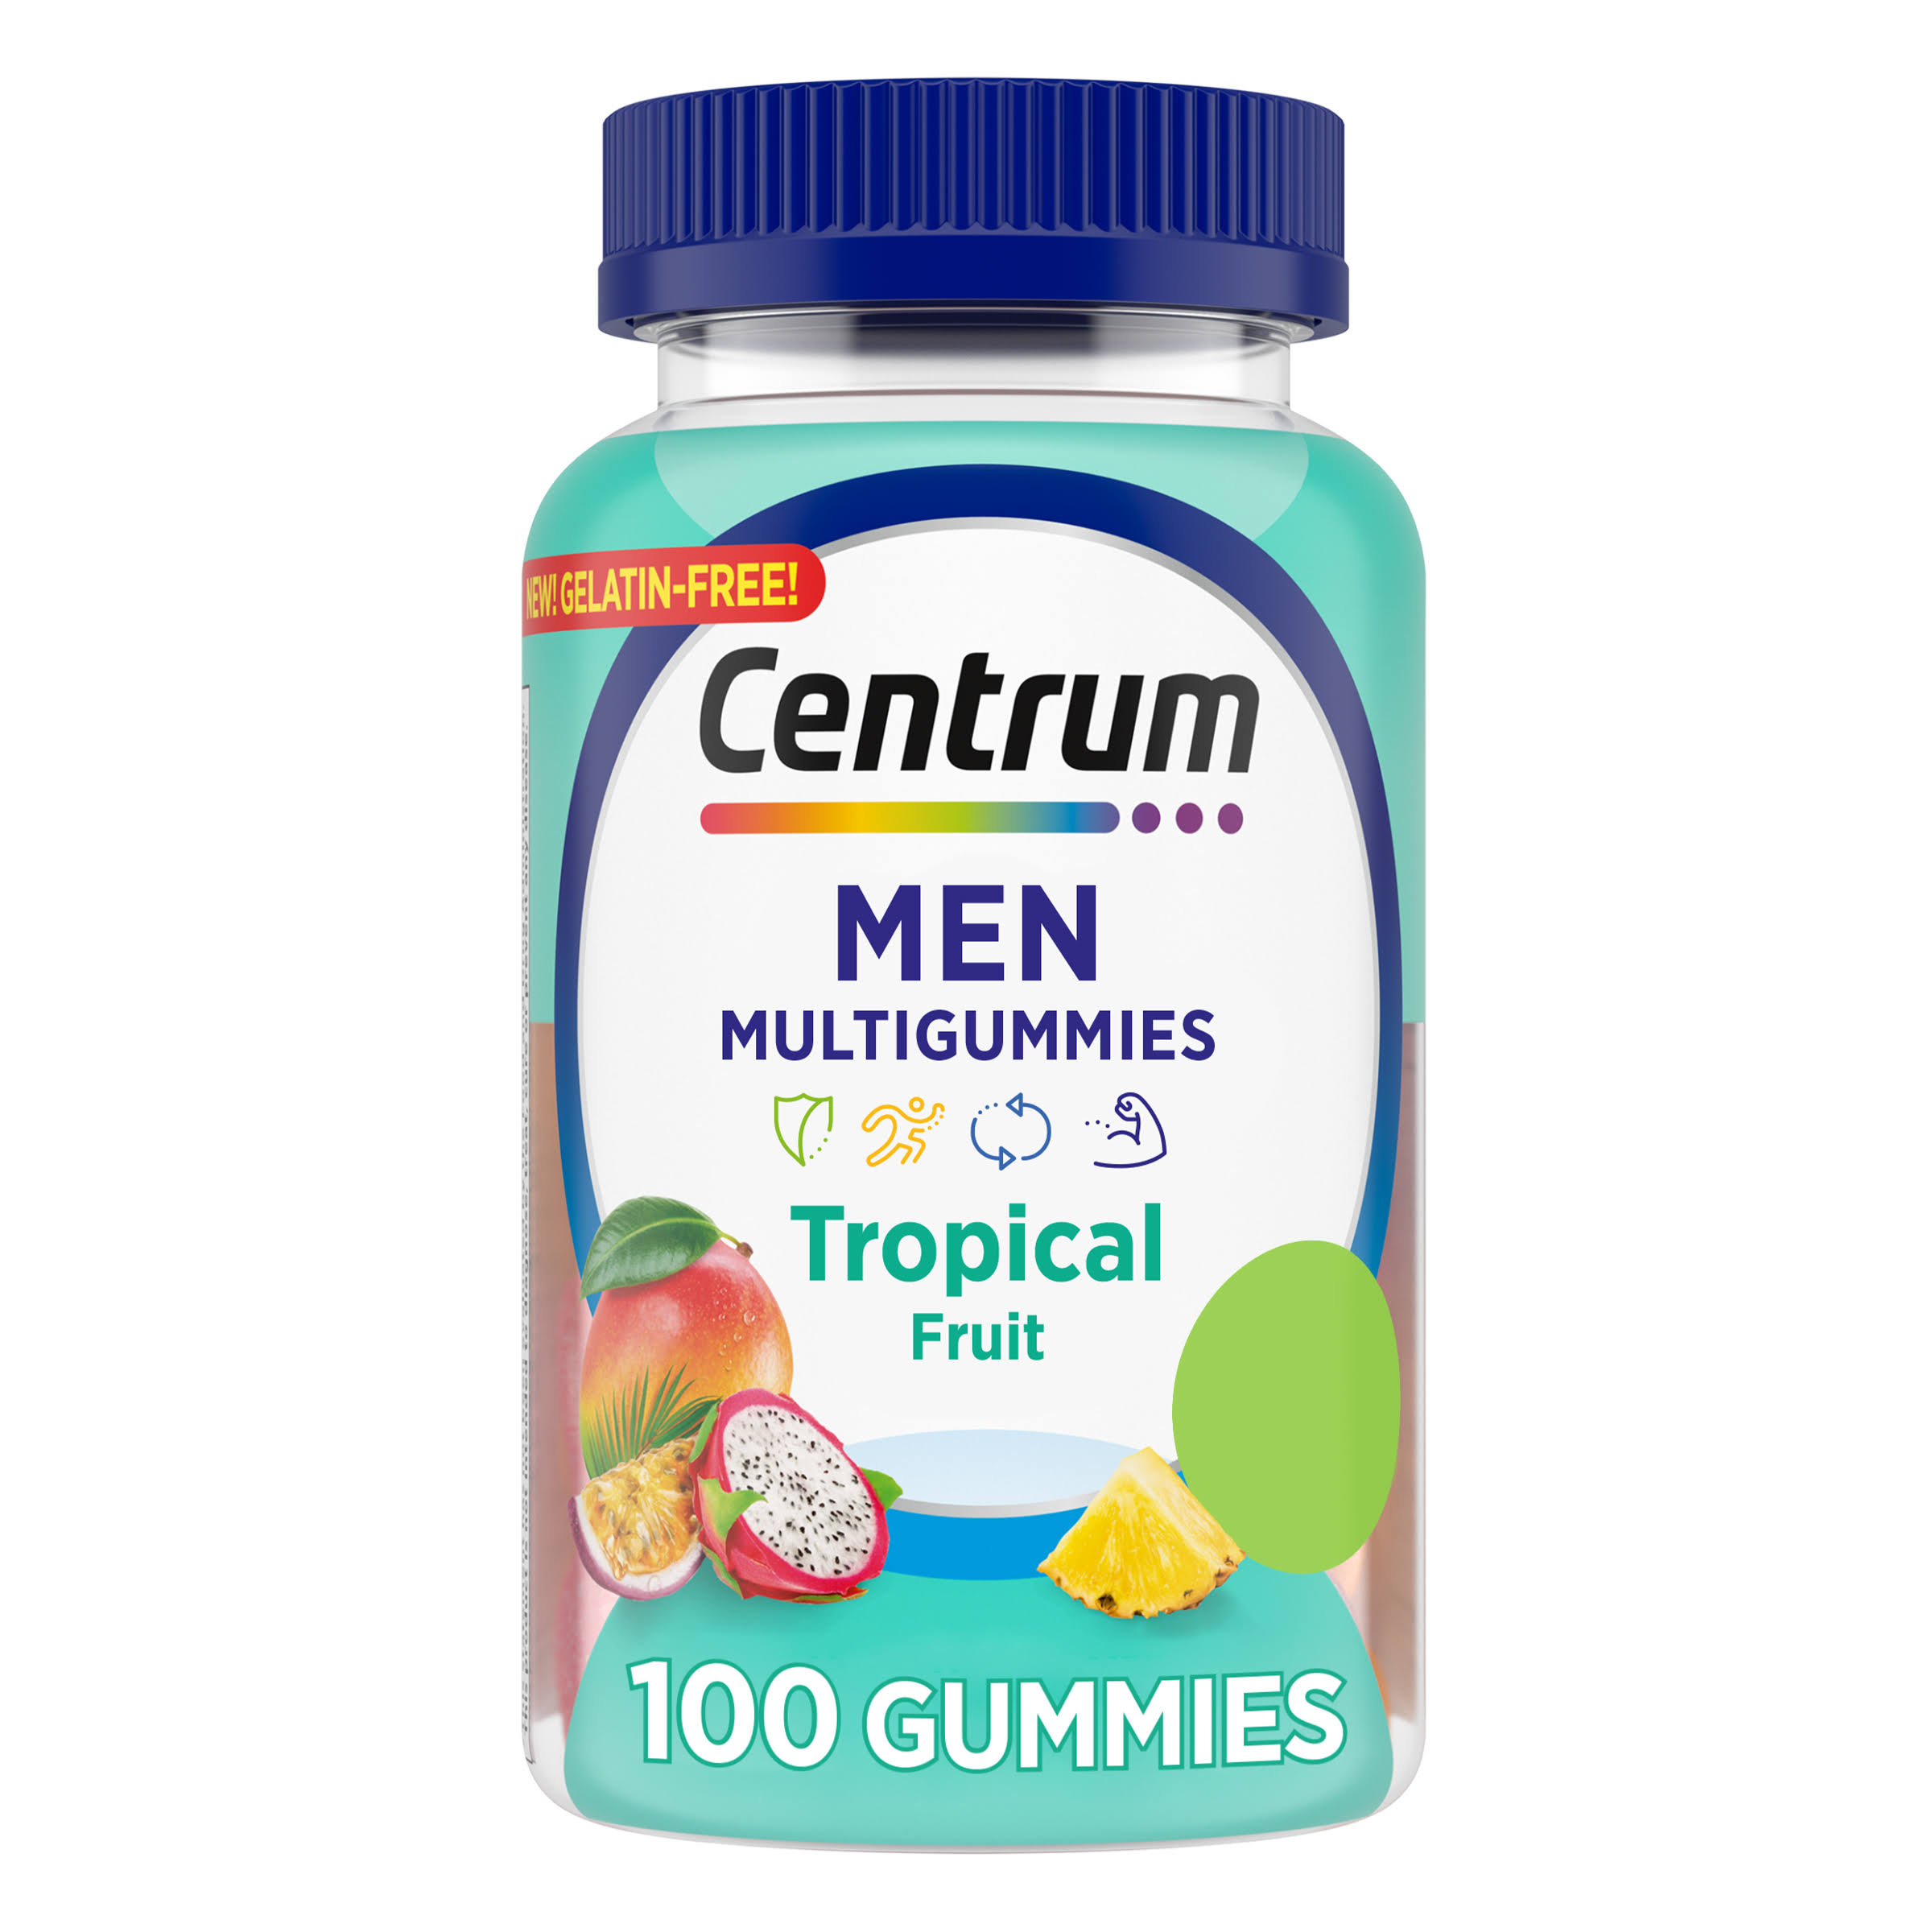 Centrum Men's Multivitamin Gummies, Tropical Fruit Flavors Made From Natural Flavors, 100 Count, 50 Day Supply